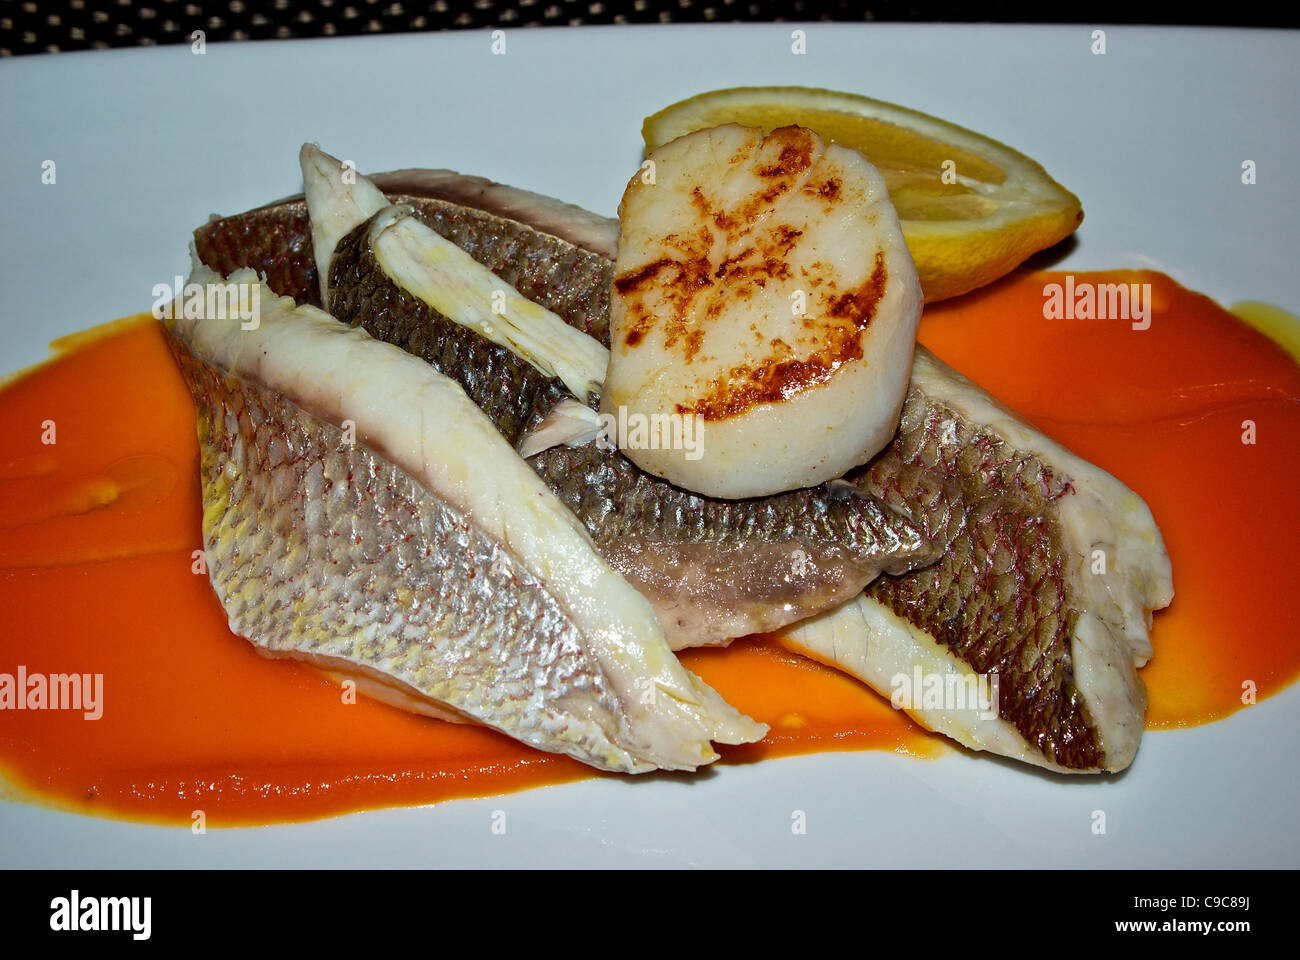 Steamed snapper fish filet caramelised seared scallop on carrot puree with half lemon seafood main course Stock Photo